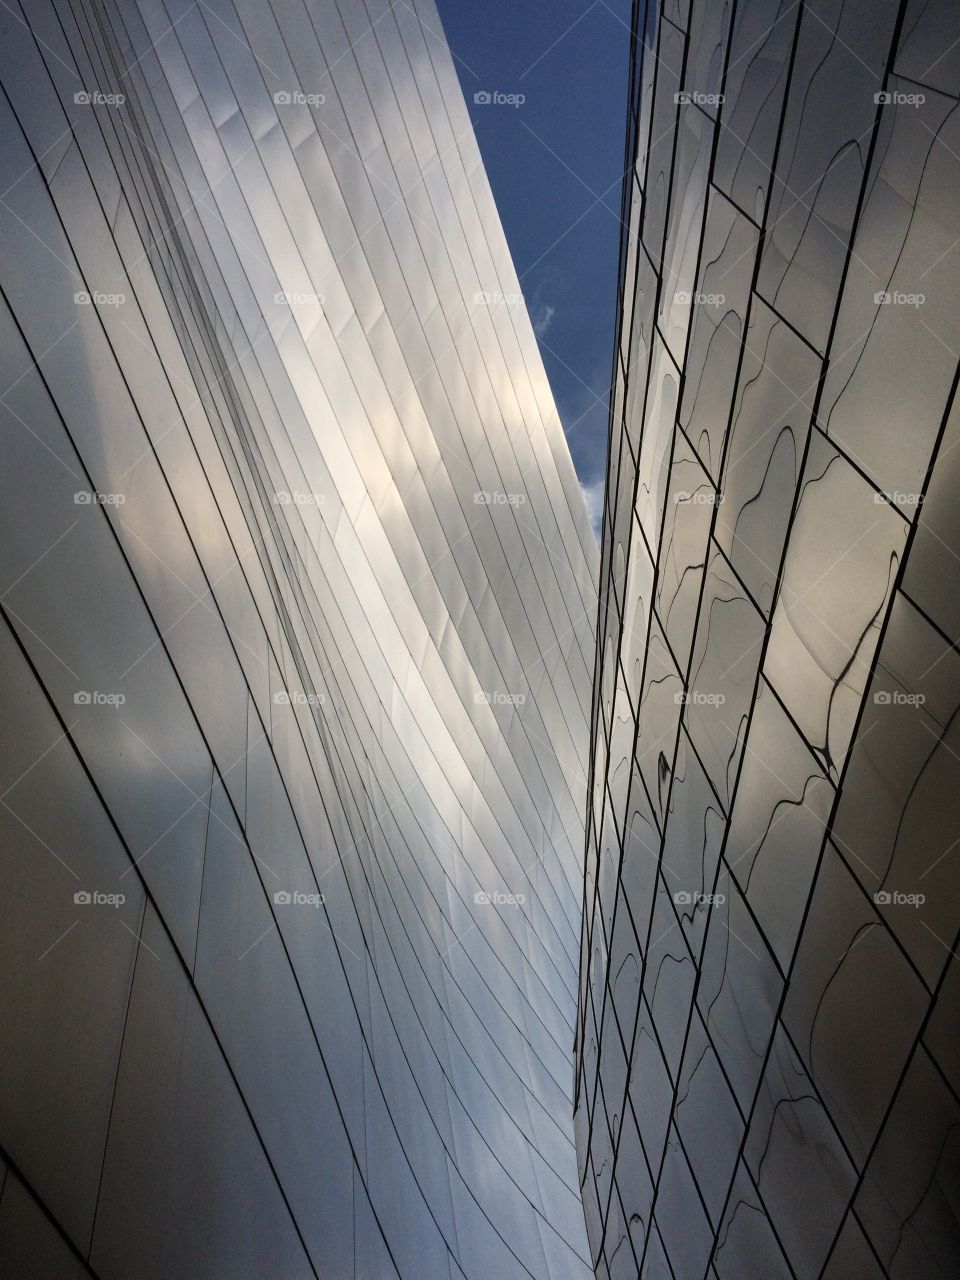 This is a photo I took outside of the Walt Disney Concert Hall in downtown L.A.